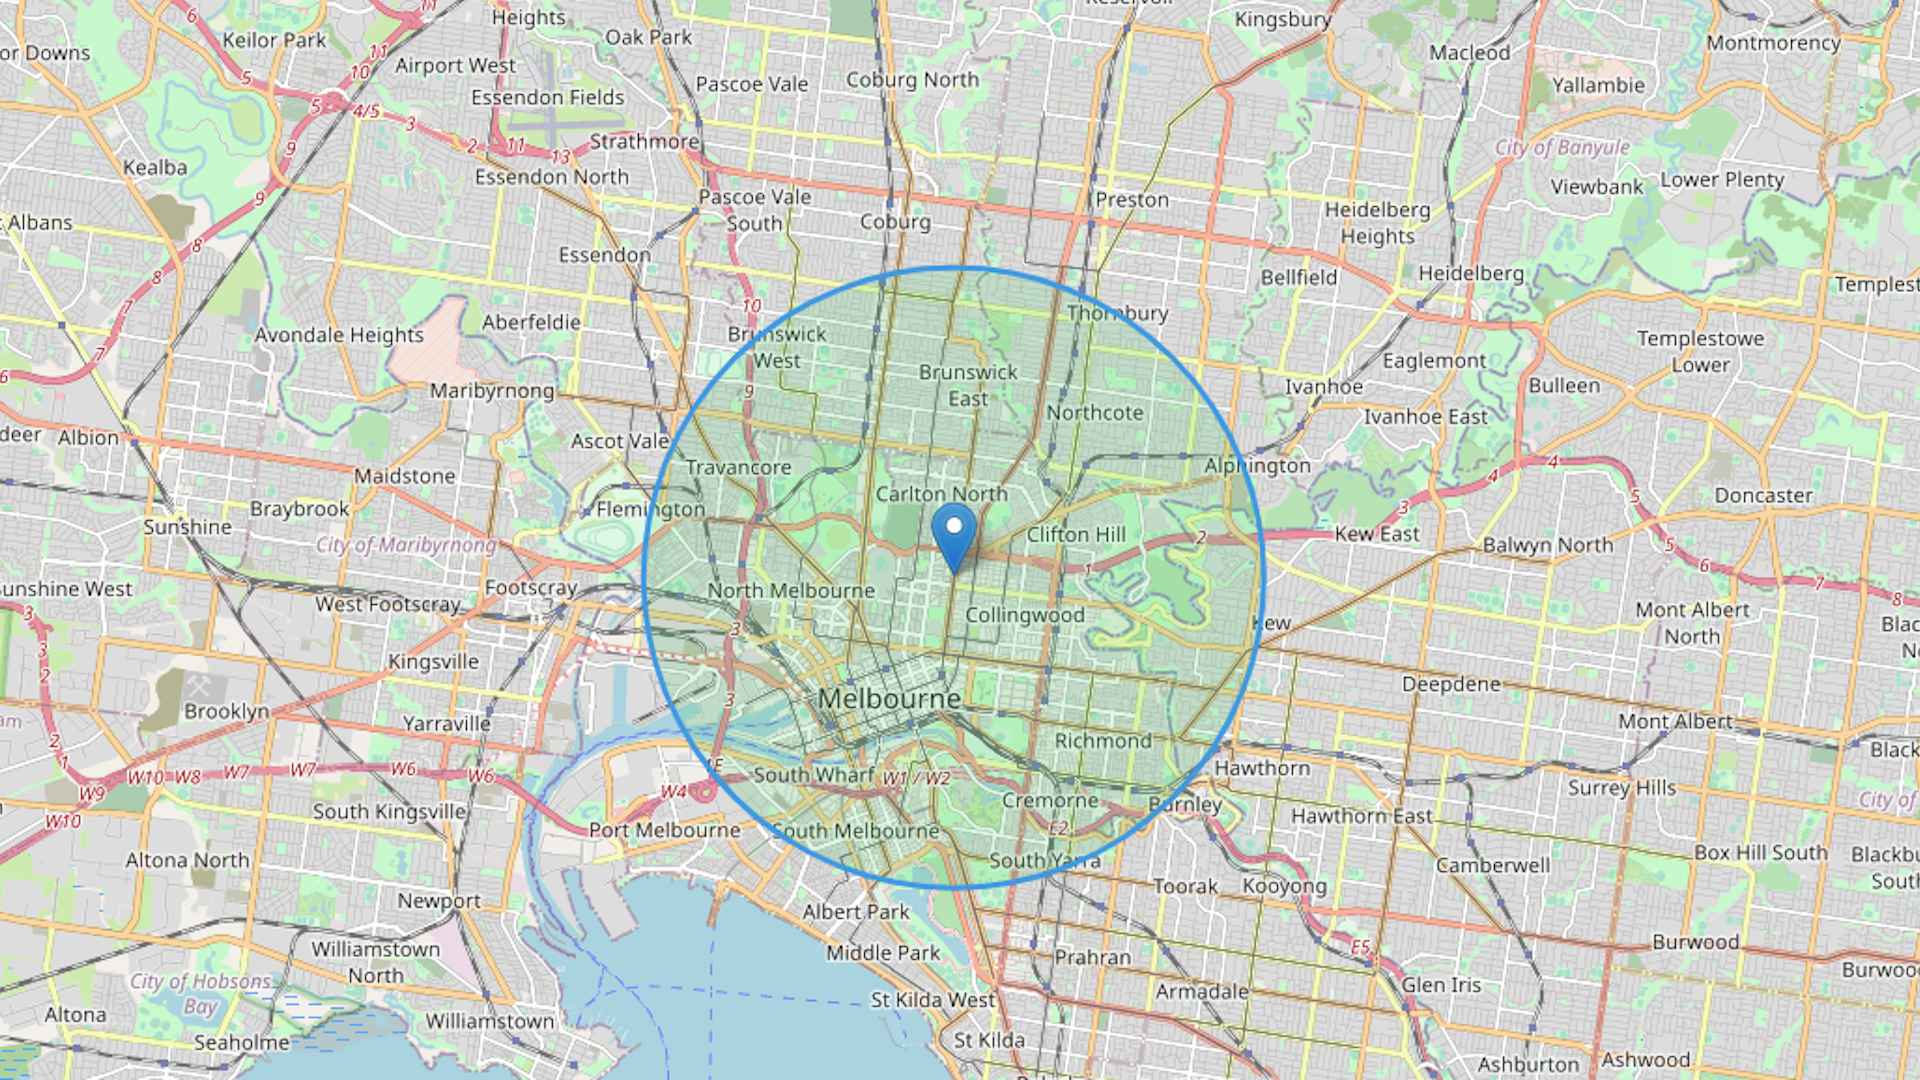 Here's How to Measure What Is Five Kilometres From Your Home During Victoria's Lockdown